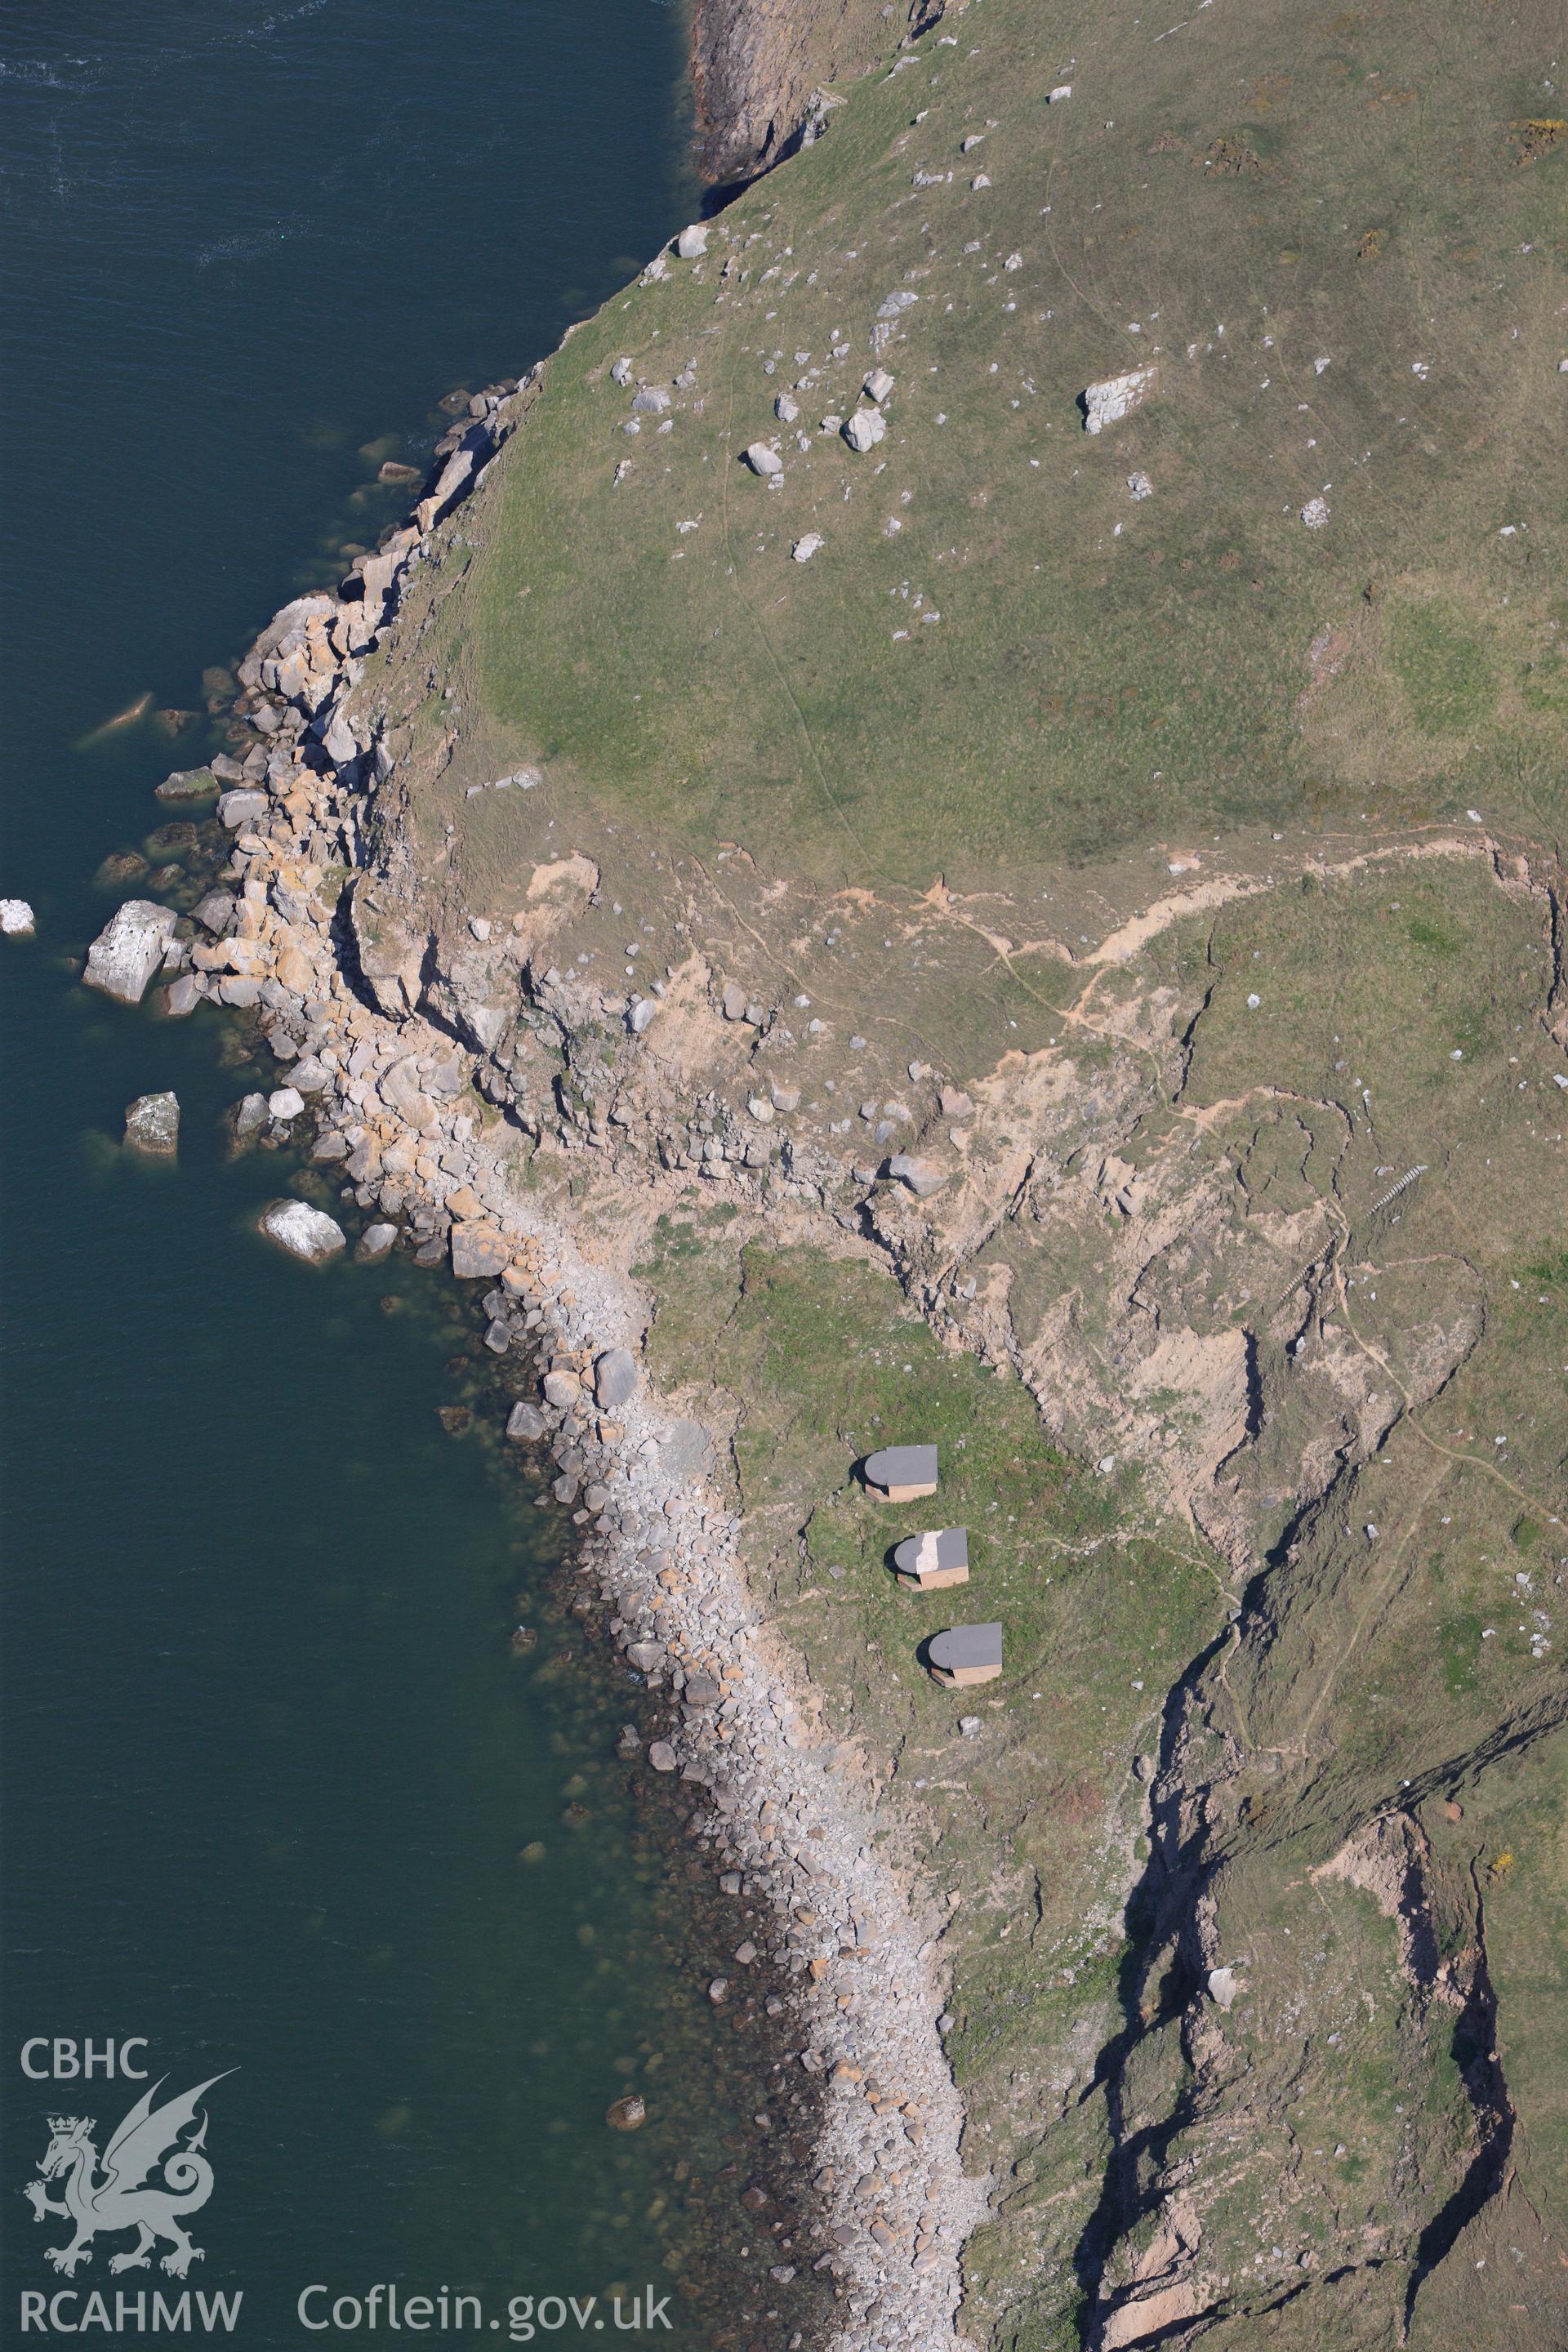 RCAHMW colour oblique photograph of Former Royal Artillery Coast Artillery School, Great Orme's Head. Taken by Toby Driver on 03/05/2011.